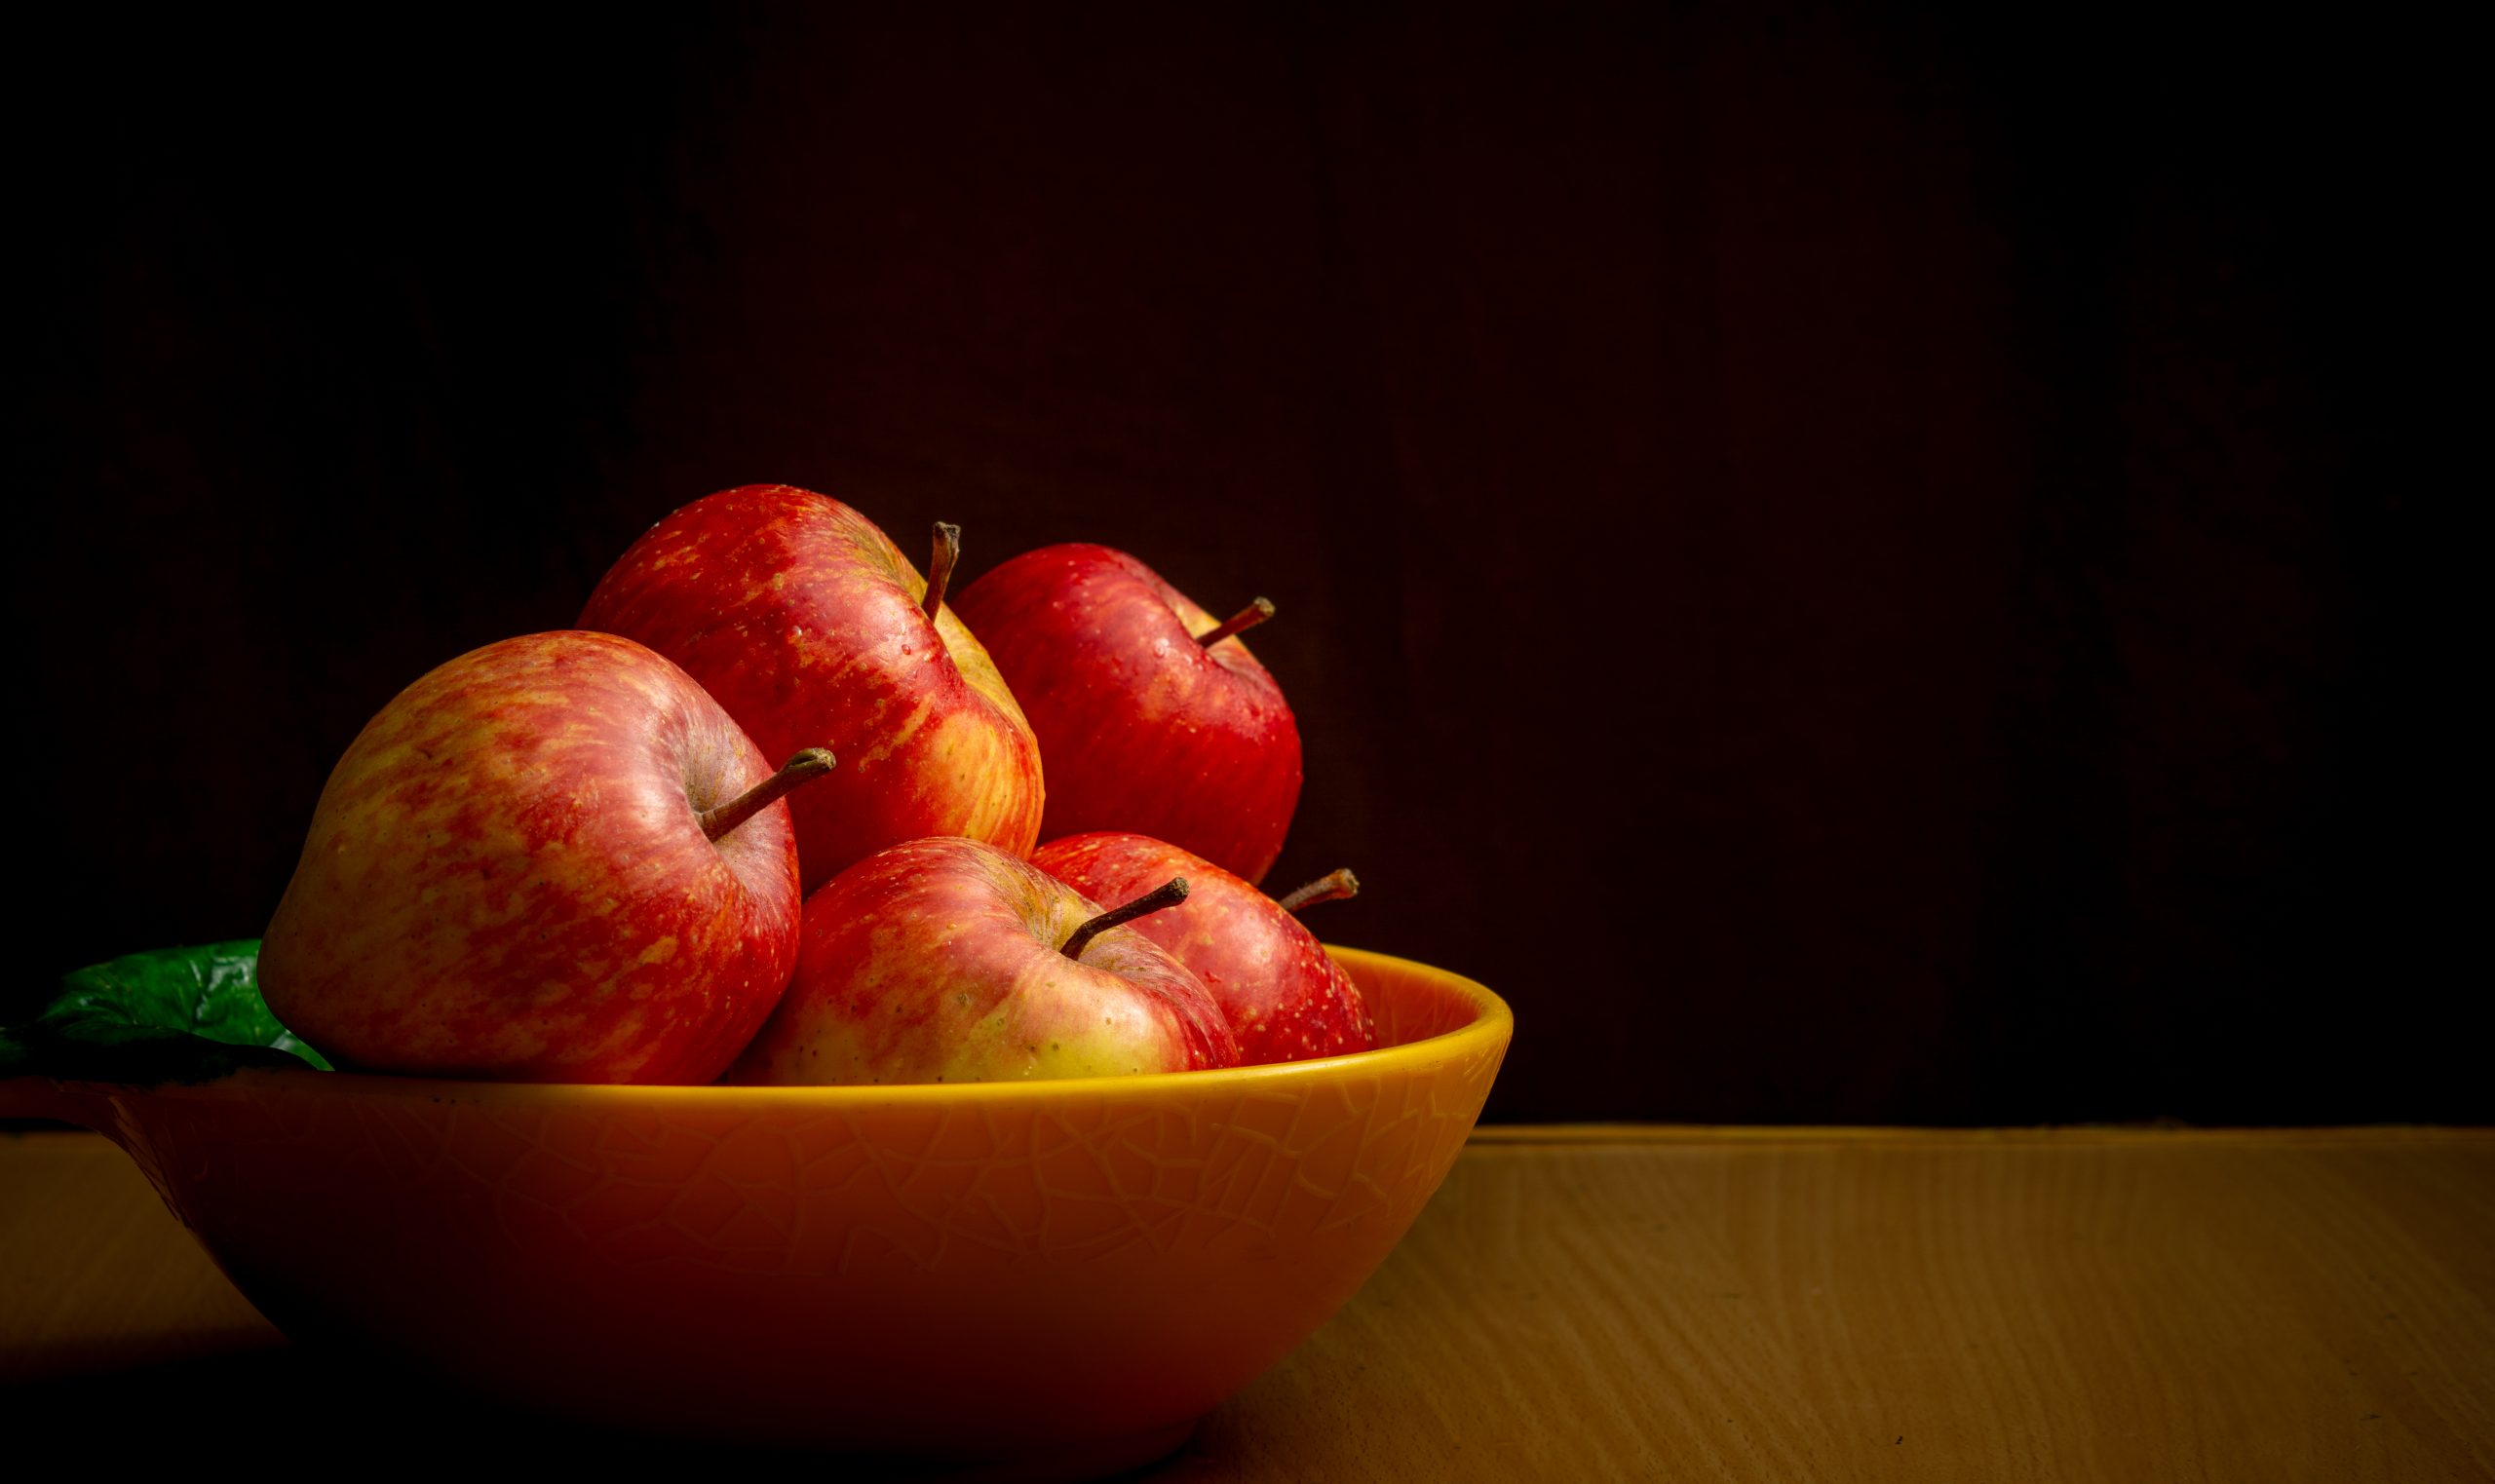 Apple in a Bowl on Focus